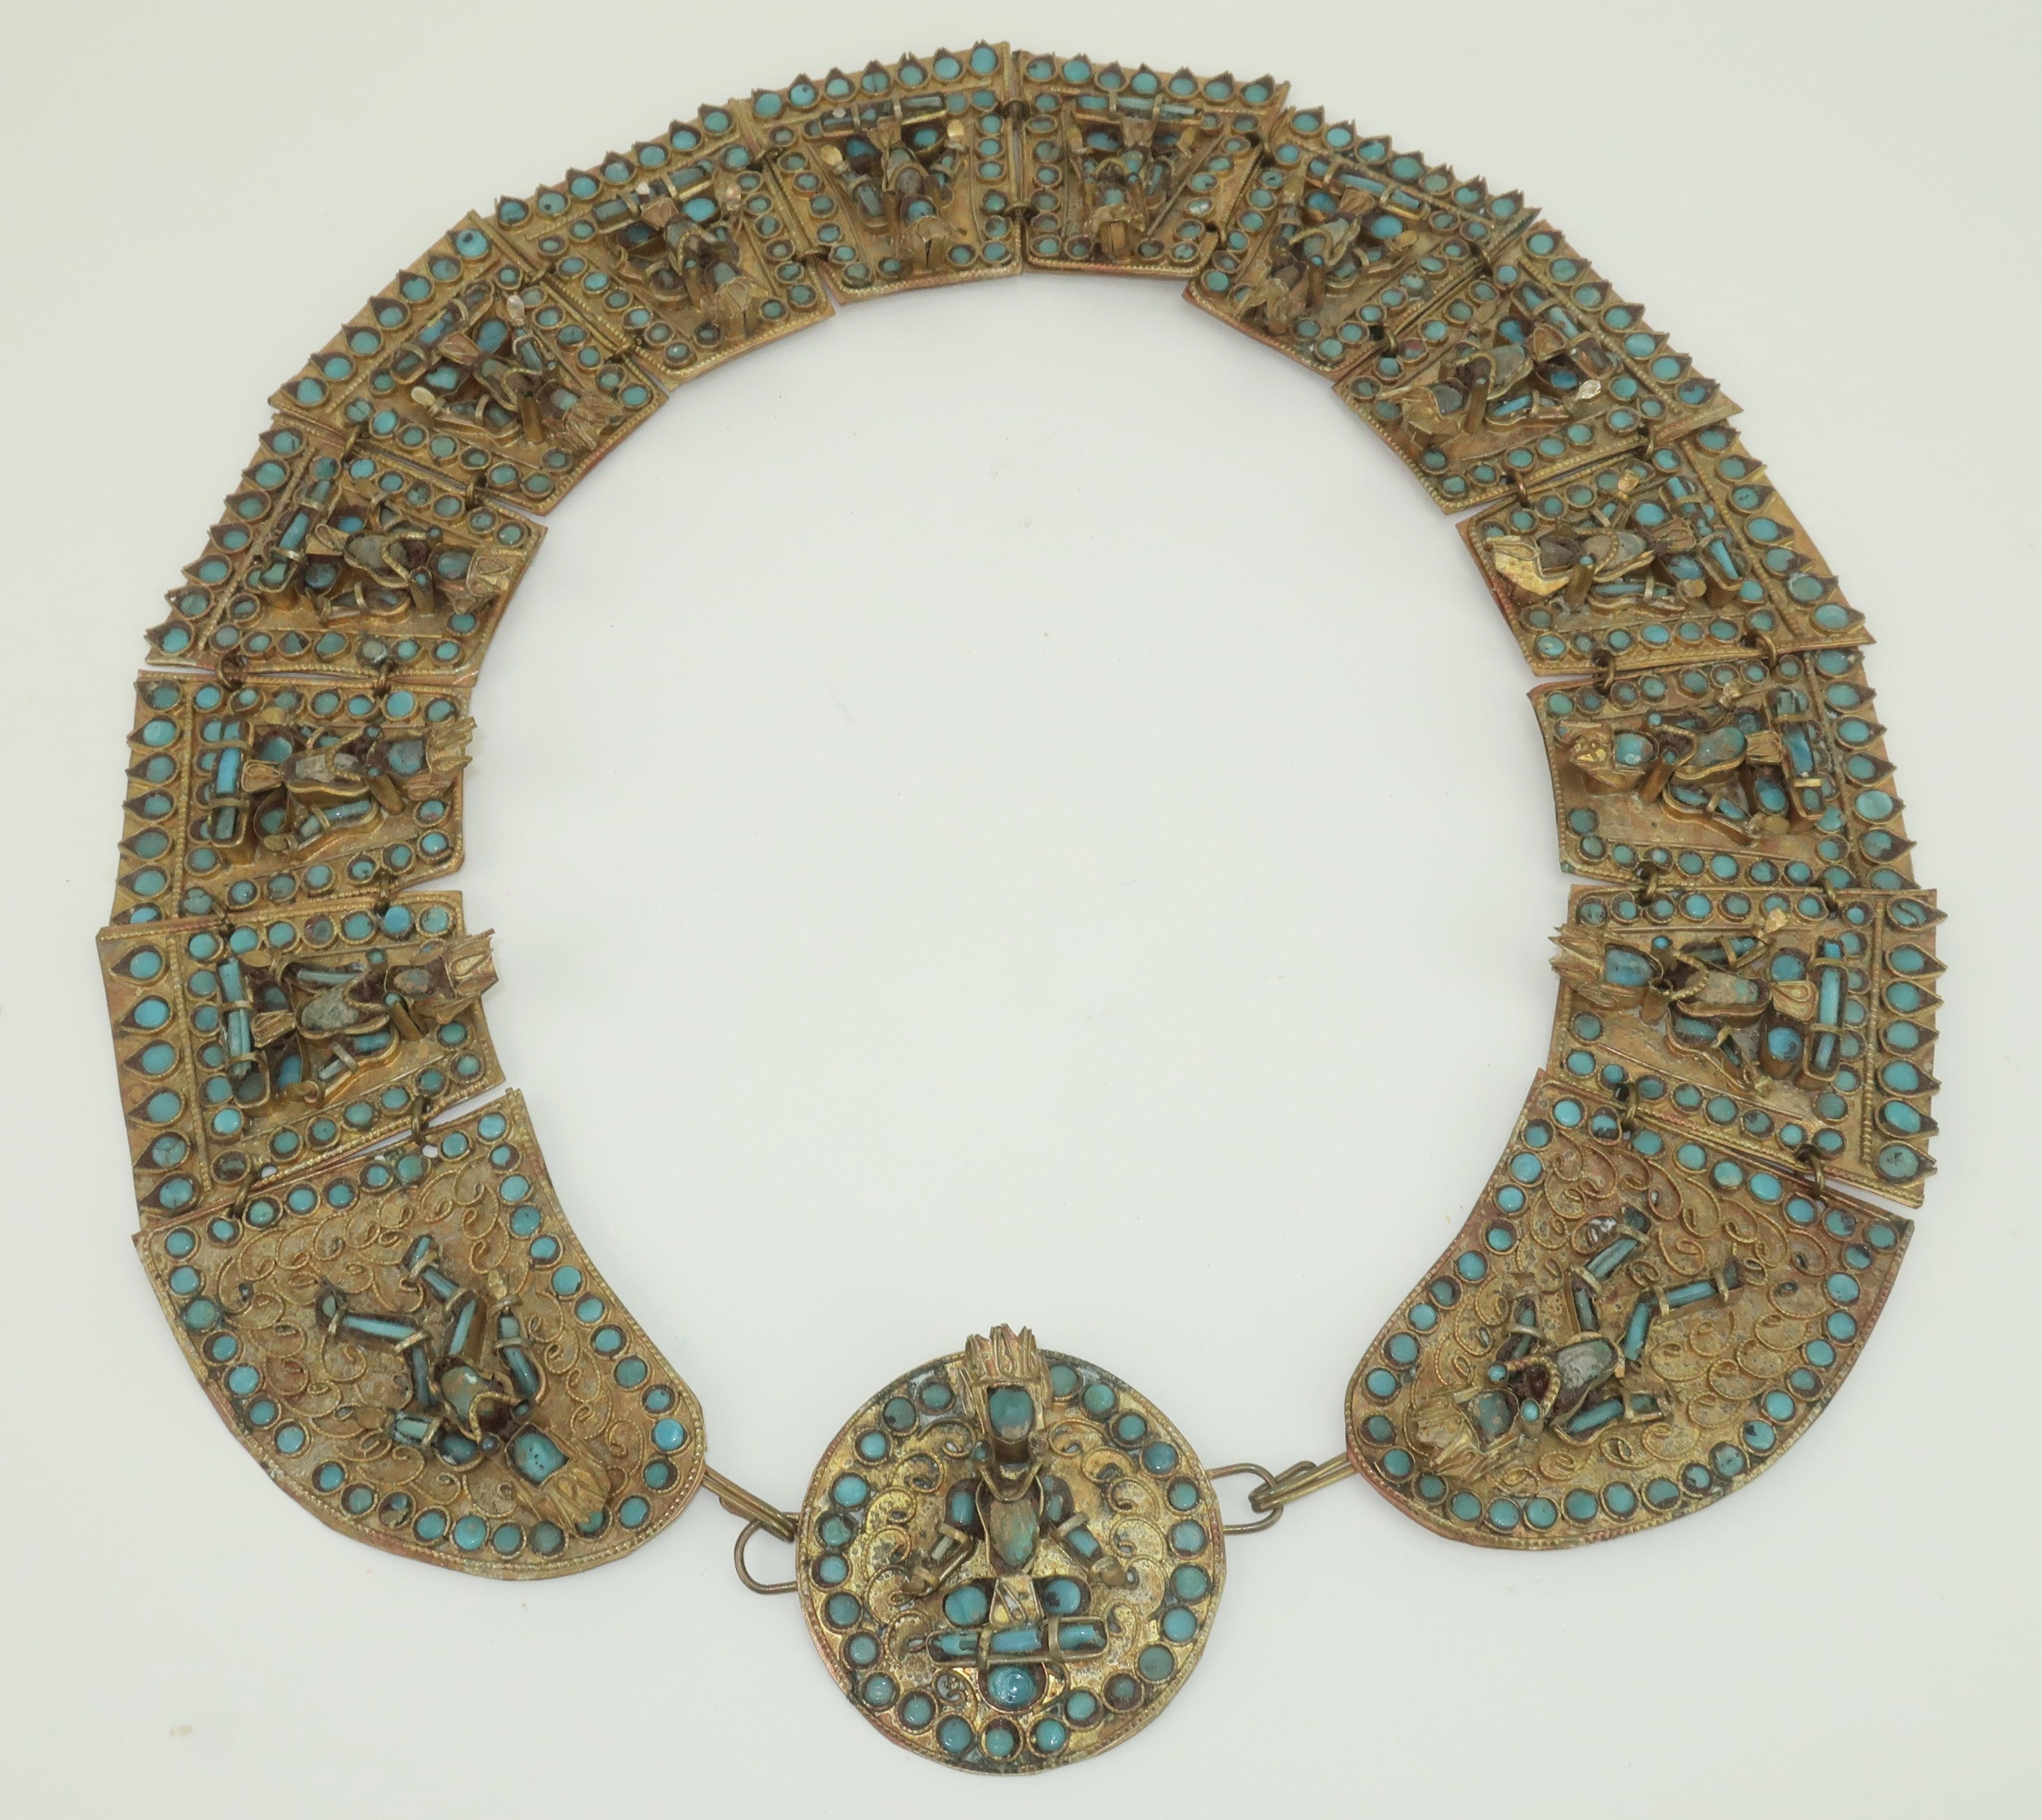 Artisan Vintage Thailand Collar Bib Necklace With Turquoise Glass Beads